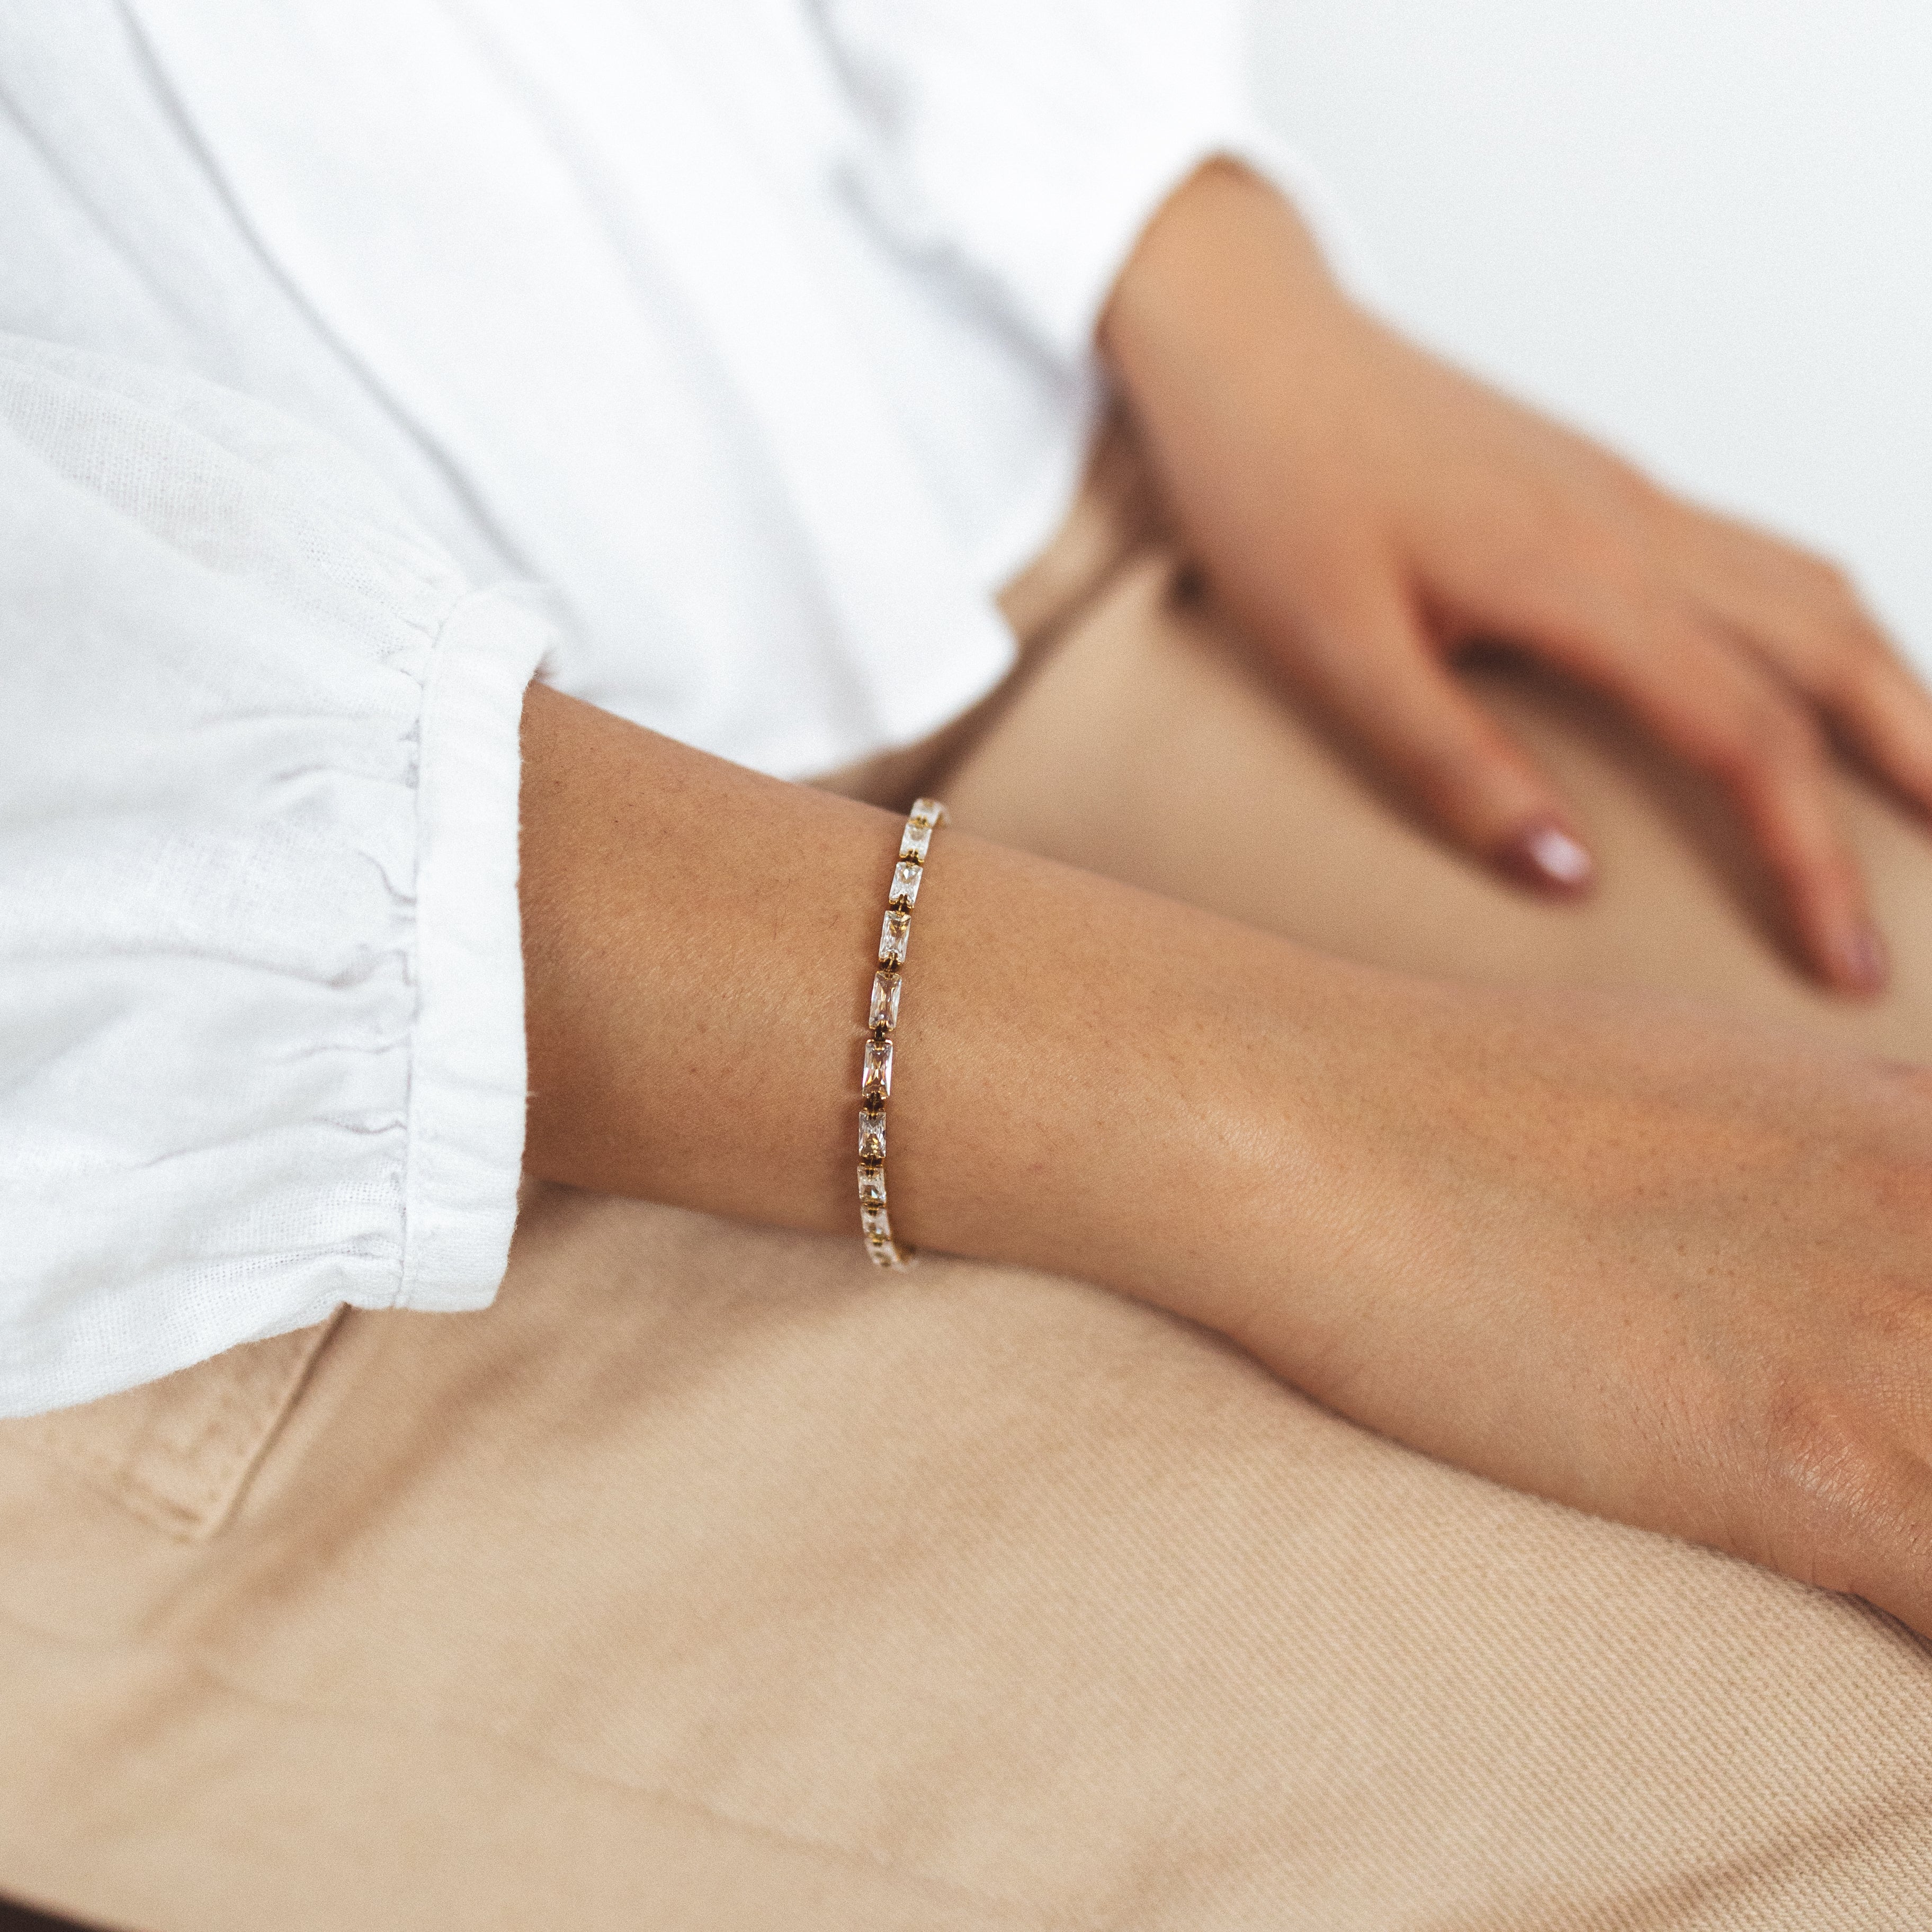 A model wearing the stunning Elizabeth Bracelet - a perfect blend of fashion and function. With adjustable sizing and 18K gold plated stainless steel, it's both versatile and durable. Enjoy its non-tarnish, water-resistant, and allergy-free properties. Elevate any look with this must-have accessory.